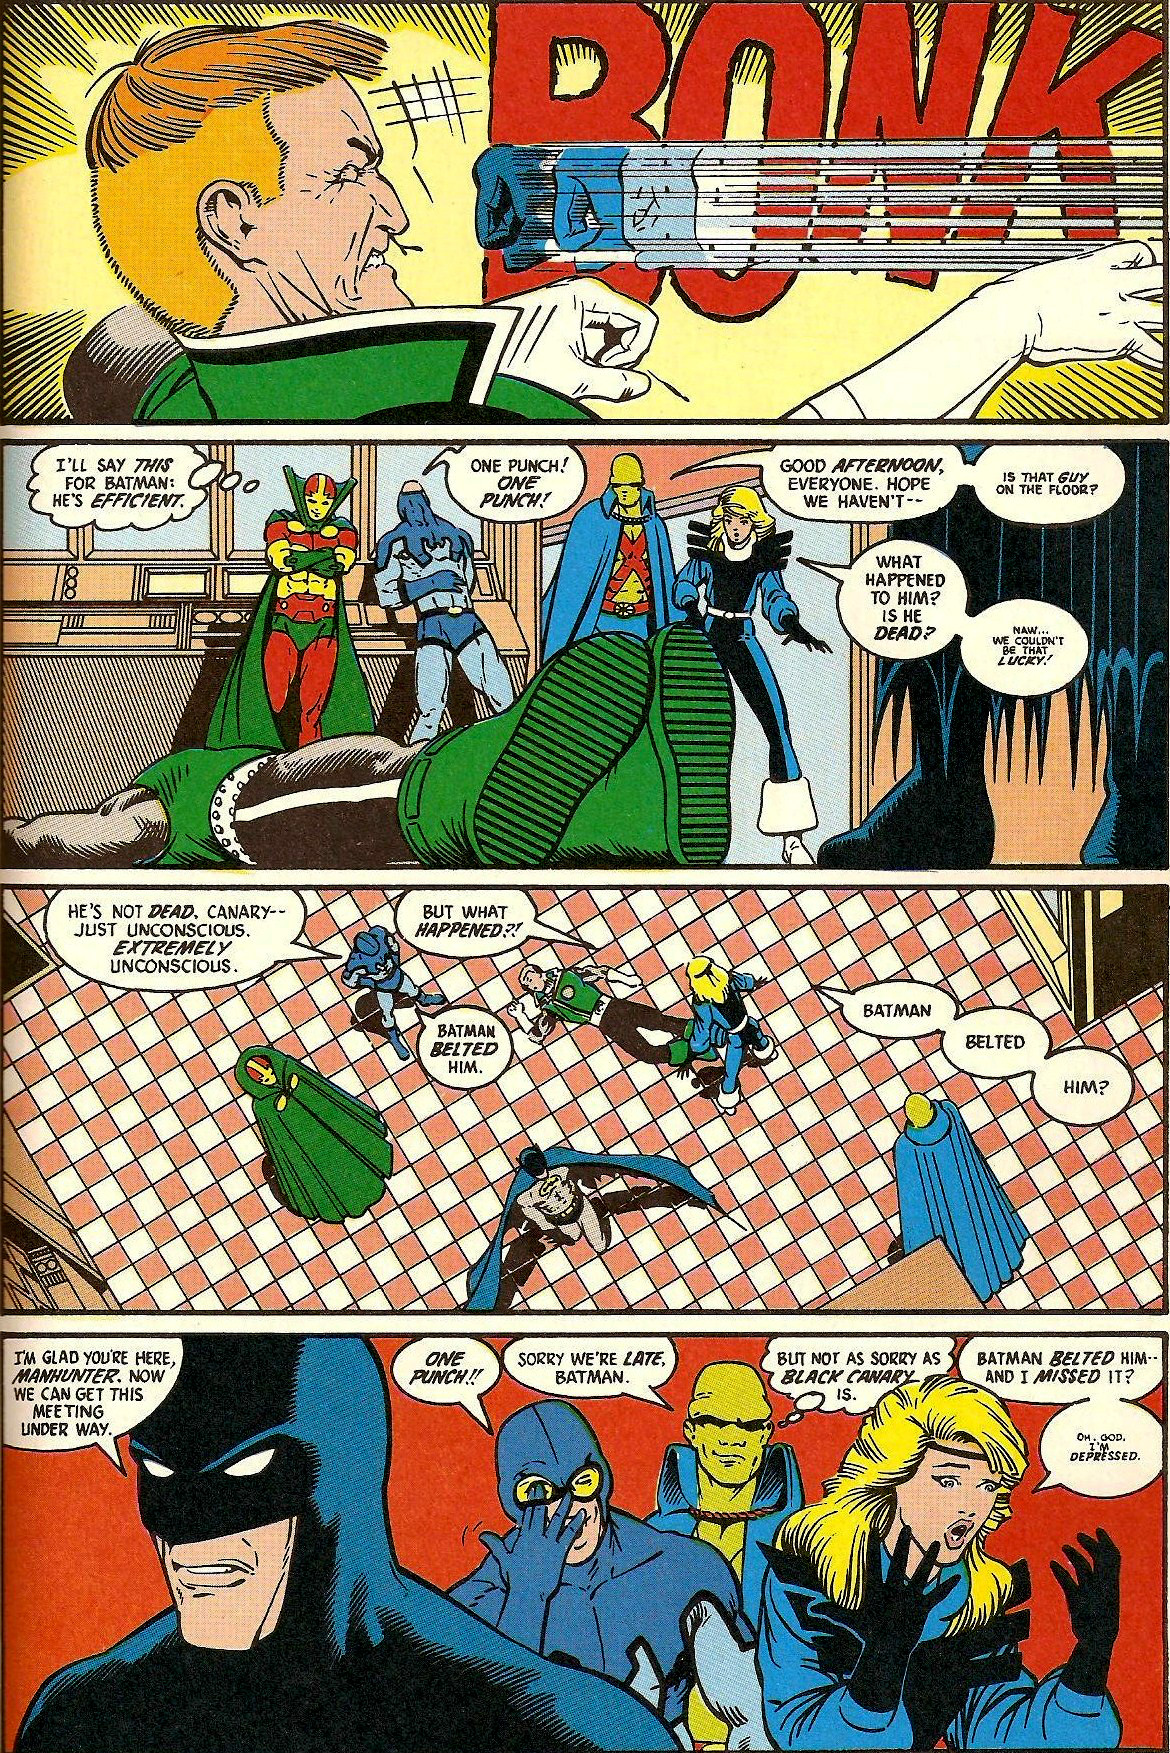 From Justice League (Vol. 1) #5 (1987)